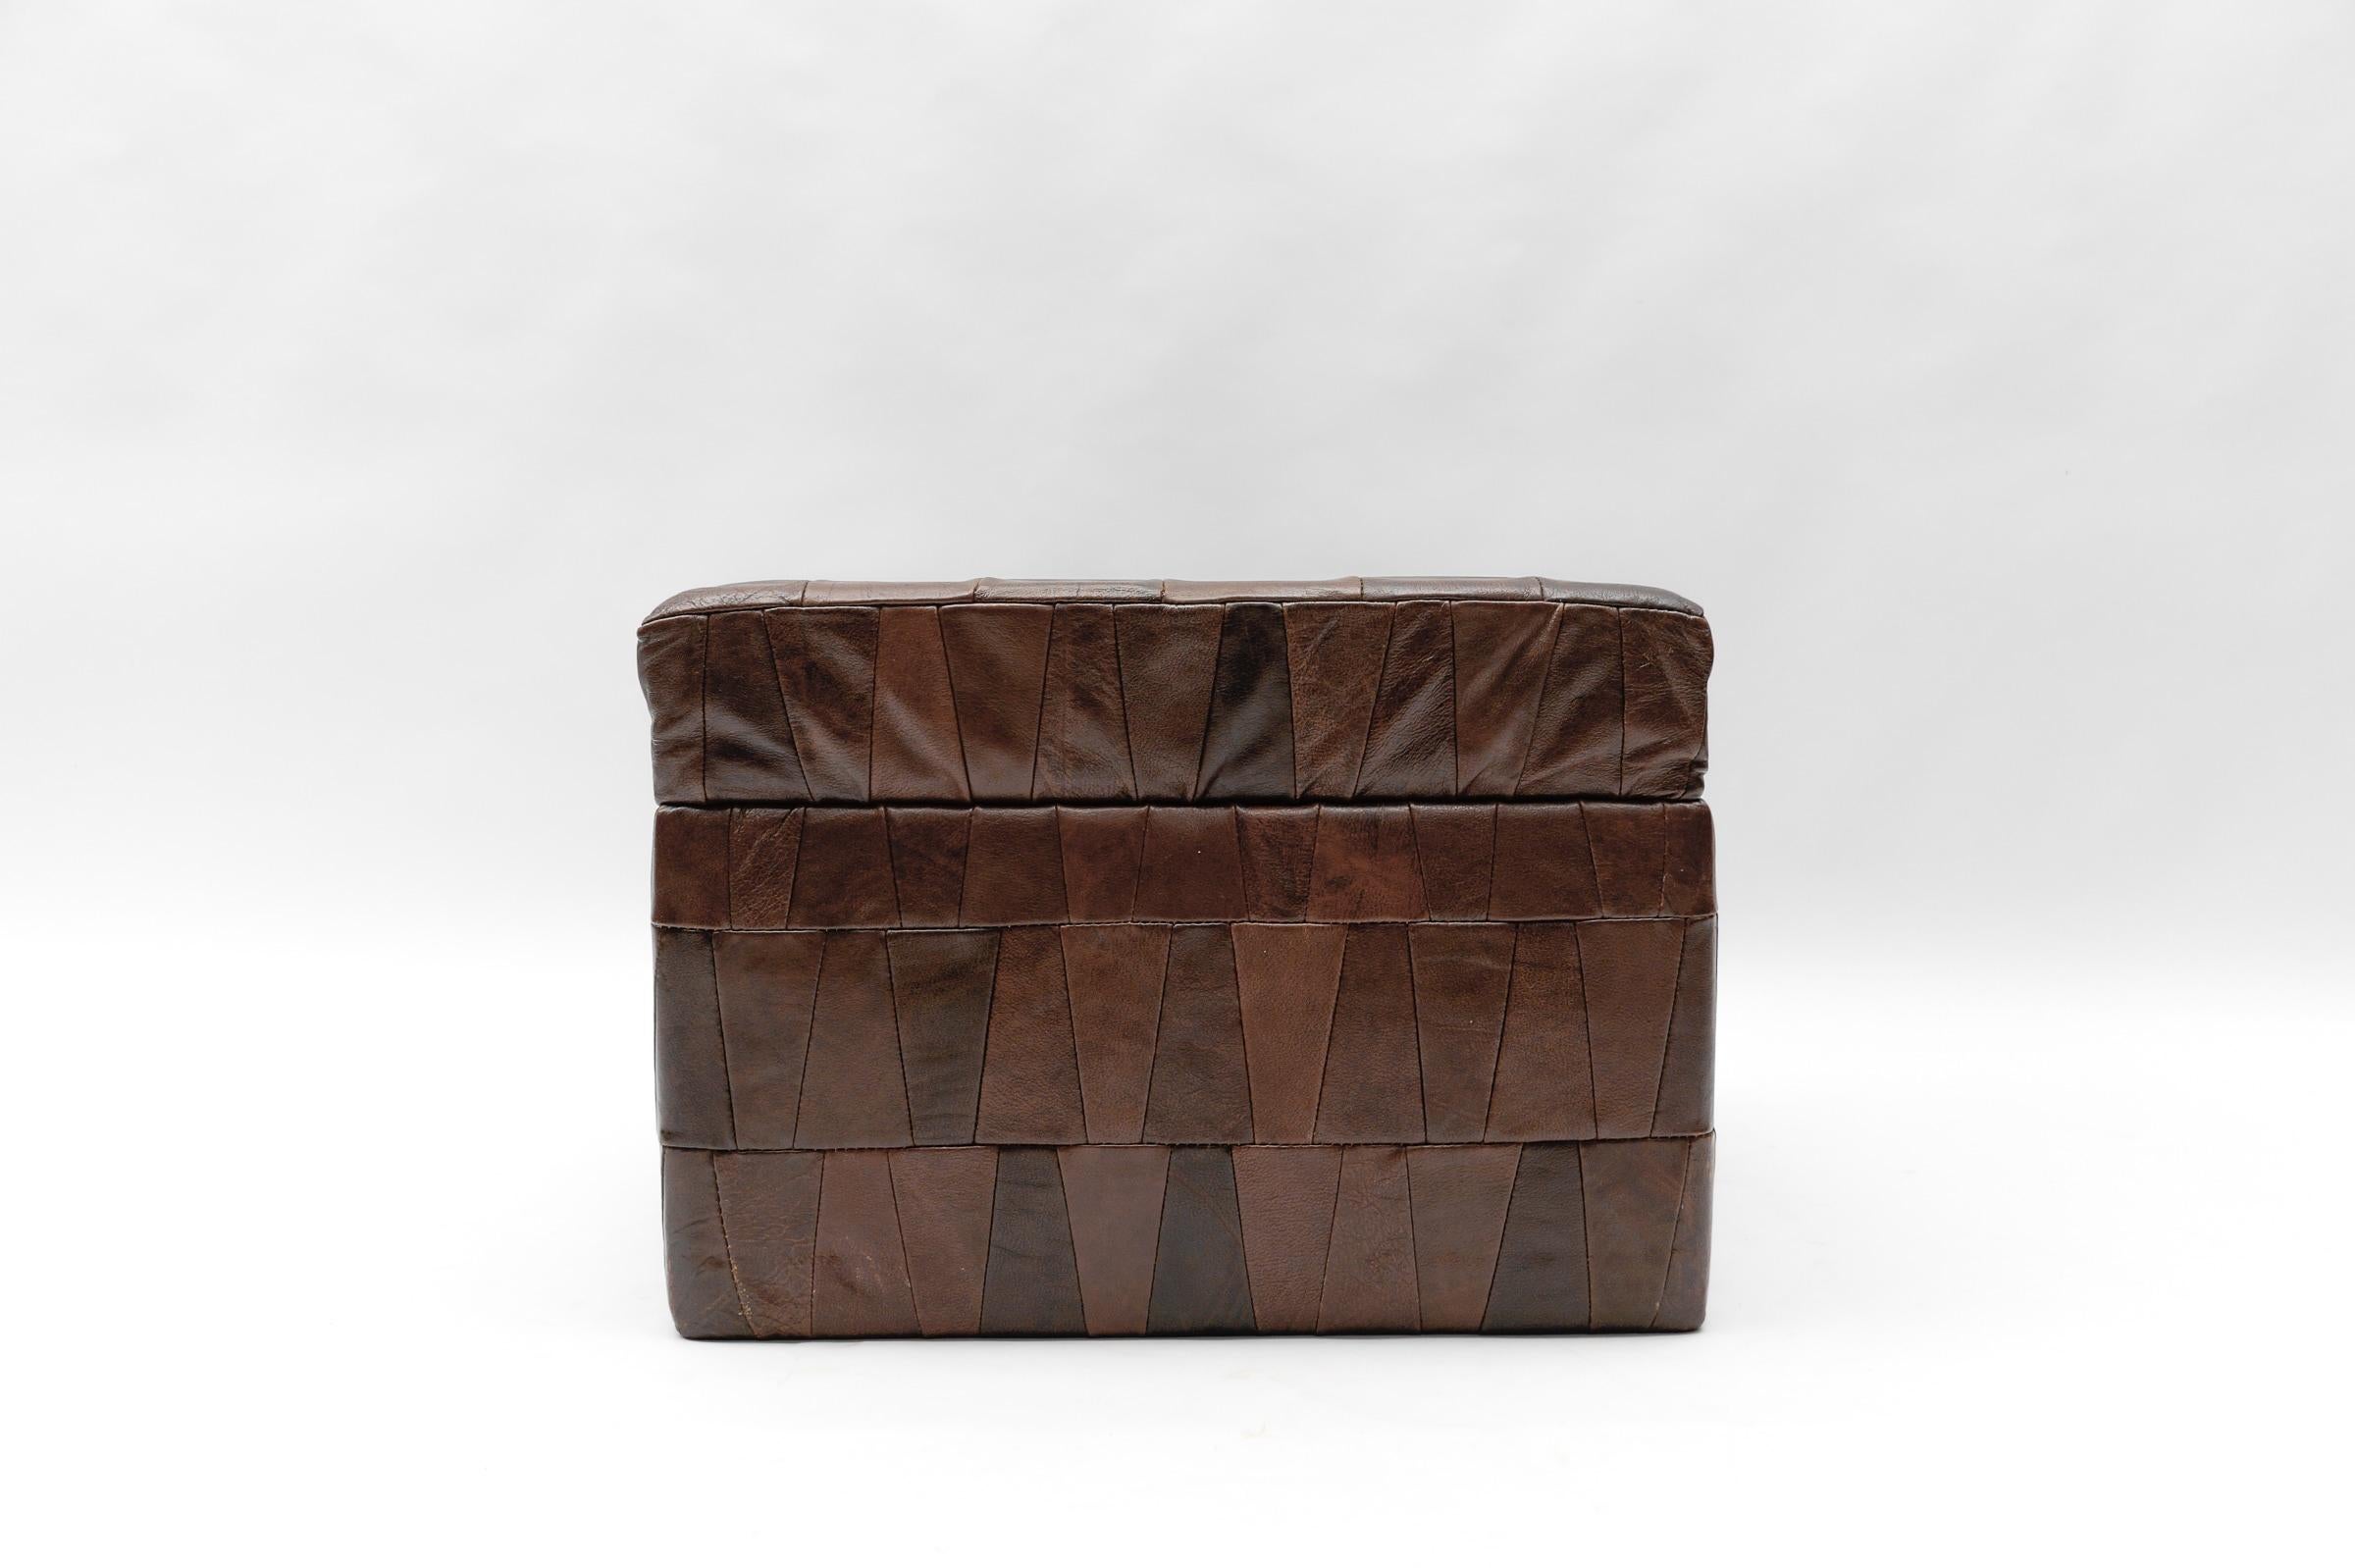 Choco Brown Leather Patchwork Pouf with Storage Space from De Sede, 1960s For Sale 1